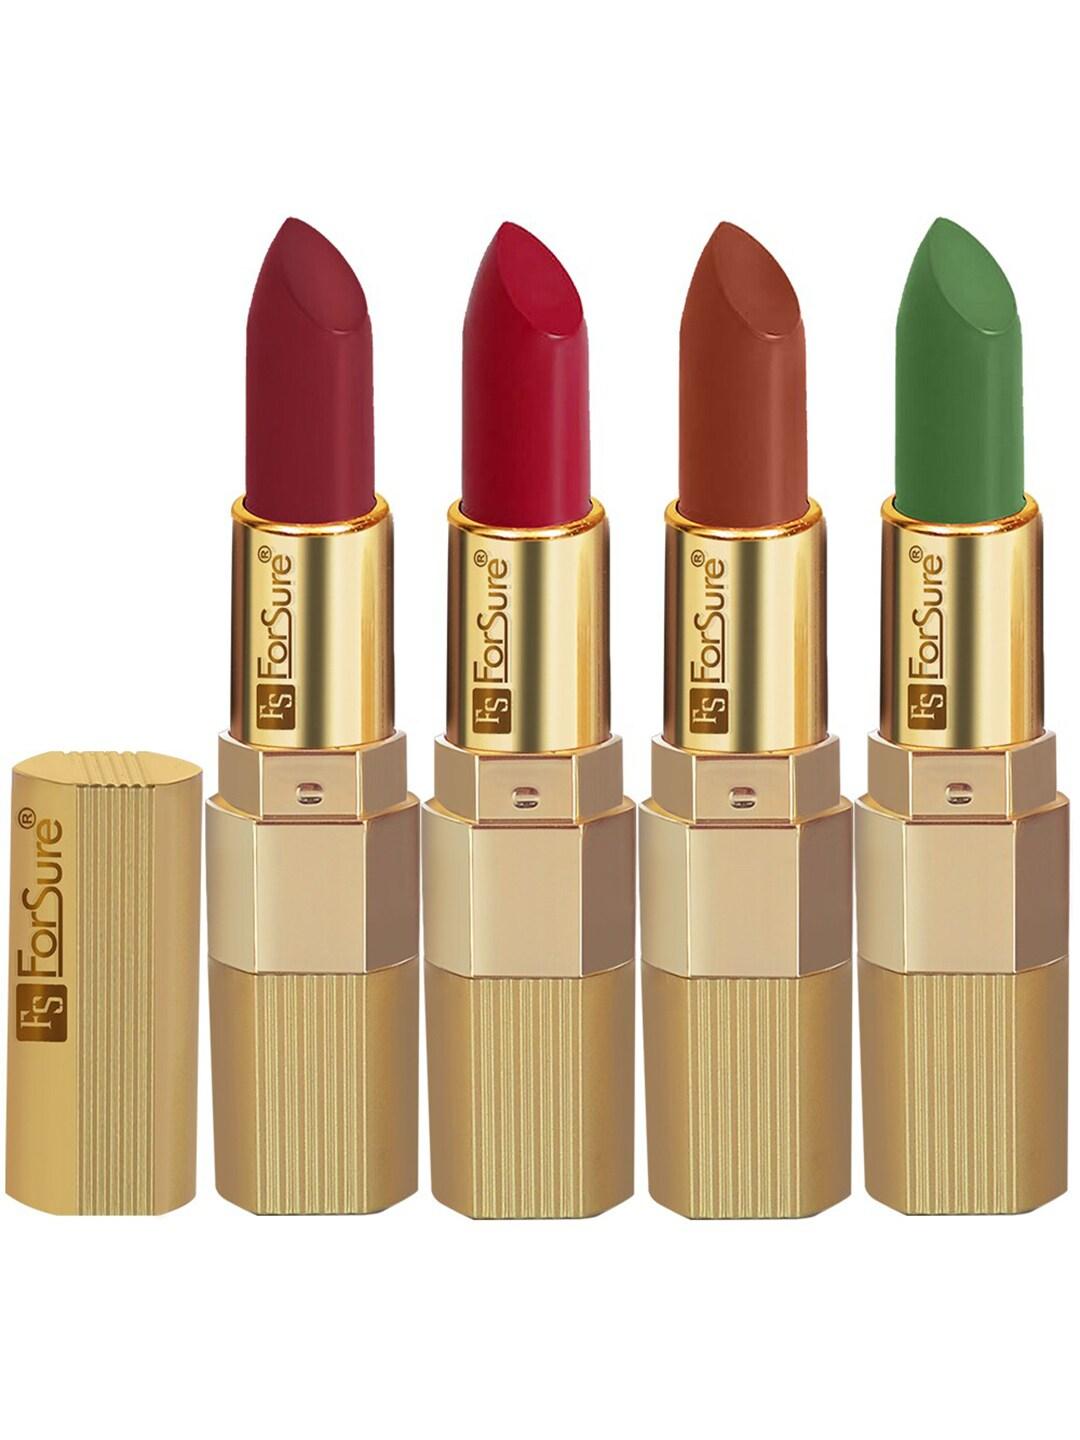 ForSure Set Of 4 Xpression Long-Lasting Highly-Pigmented Creamy Matte Lipstick - 3.5g each